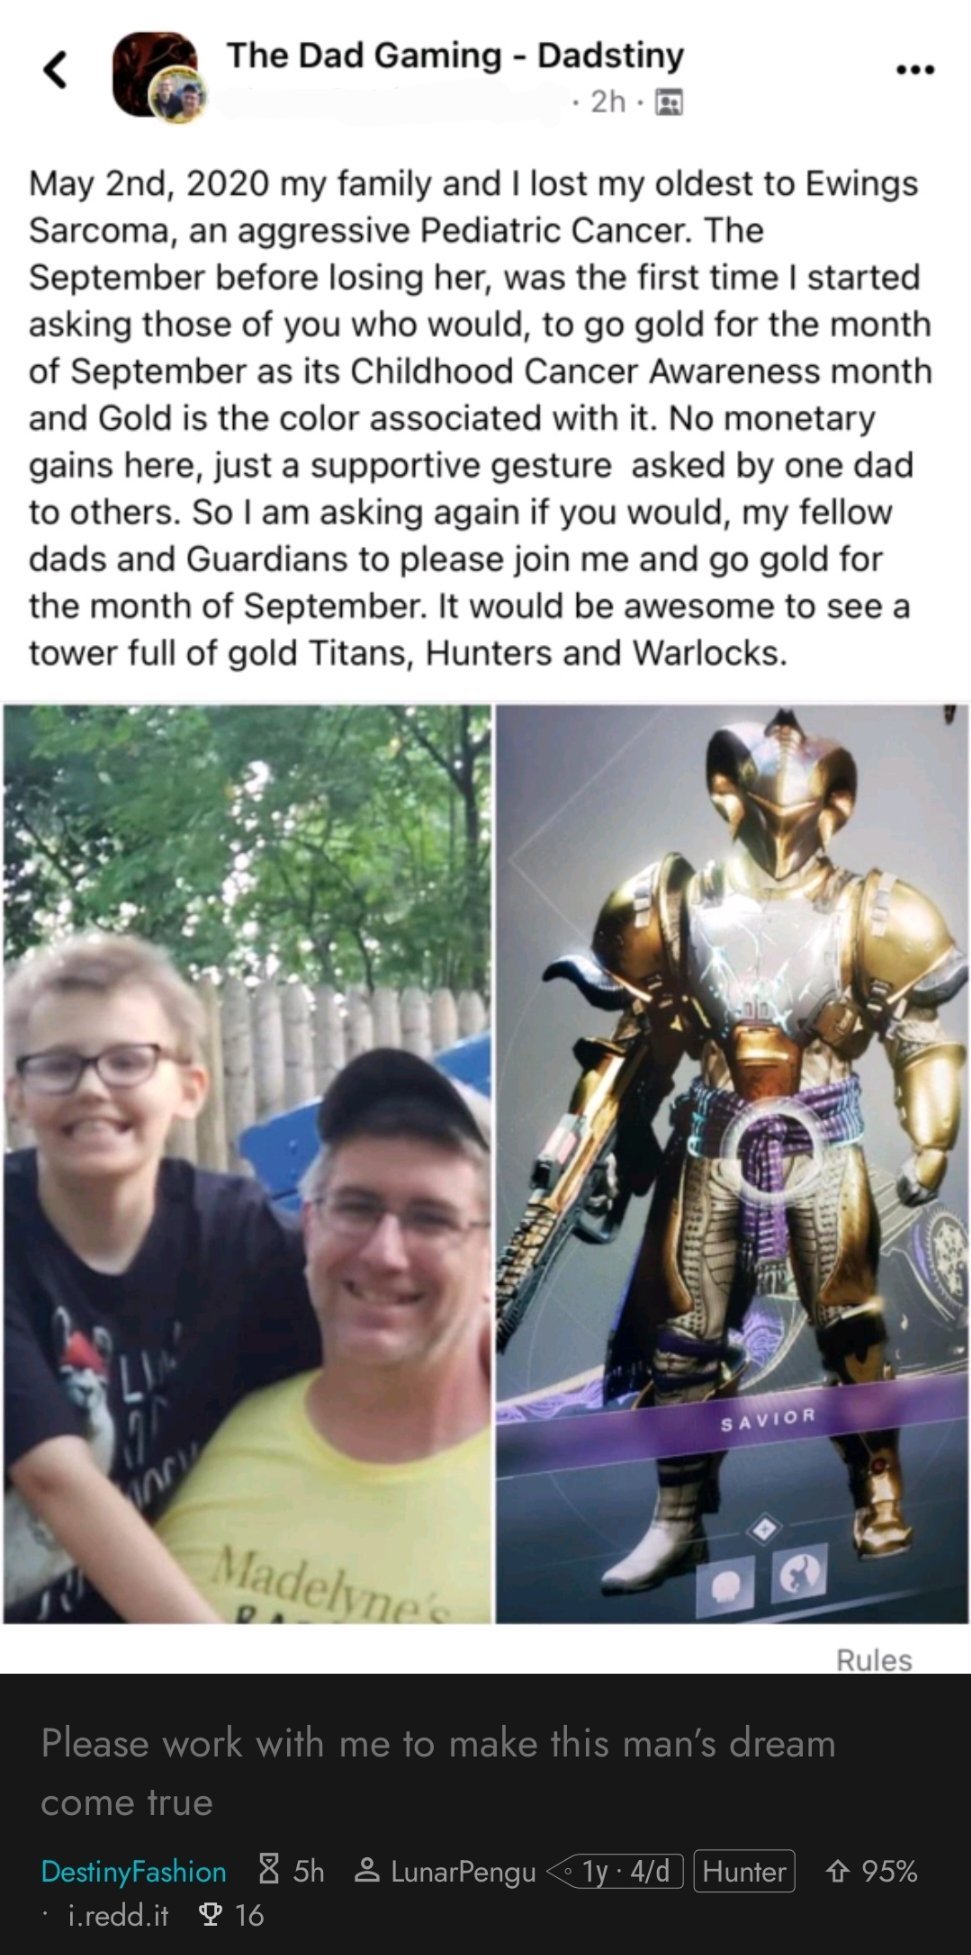 Reddit post of the Dad asking guardians to show their gold colors.